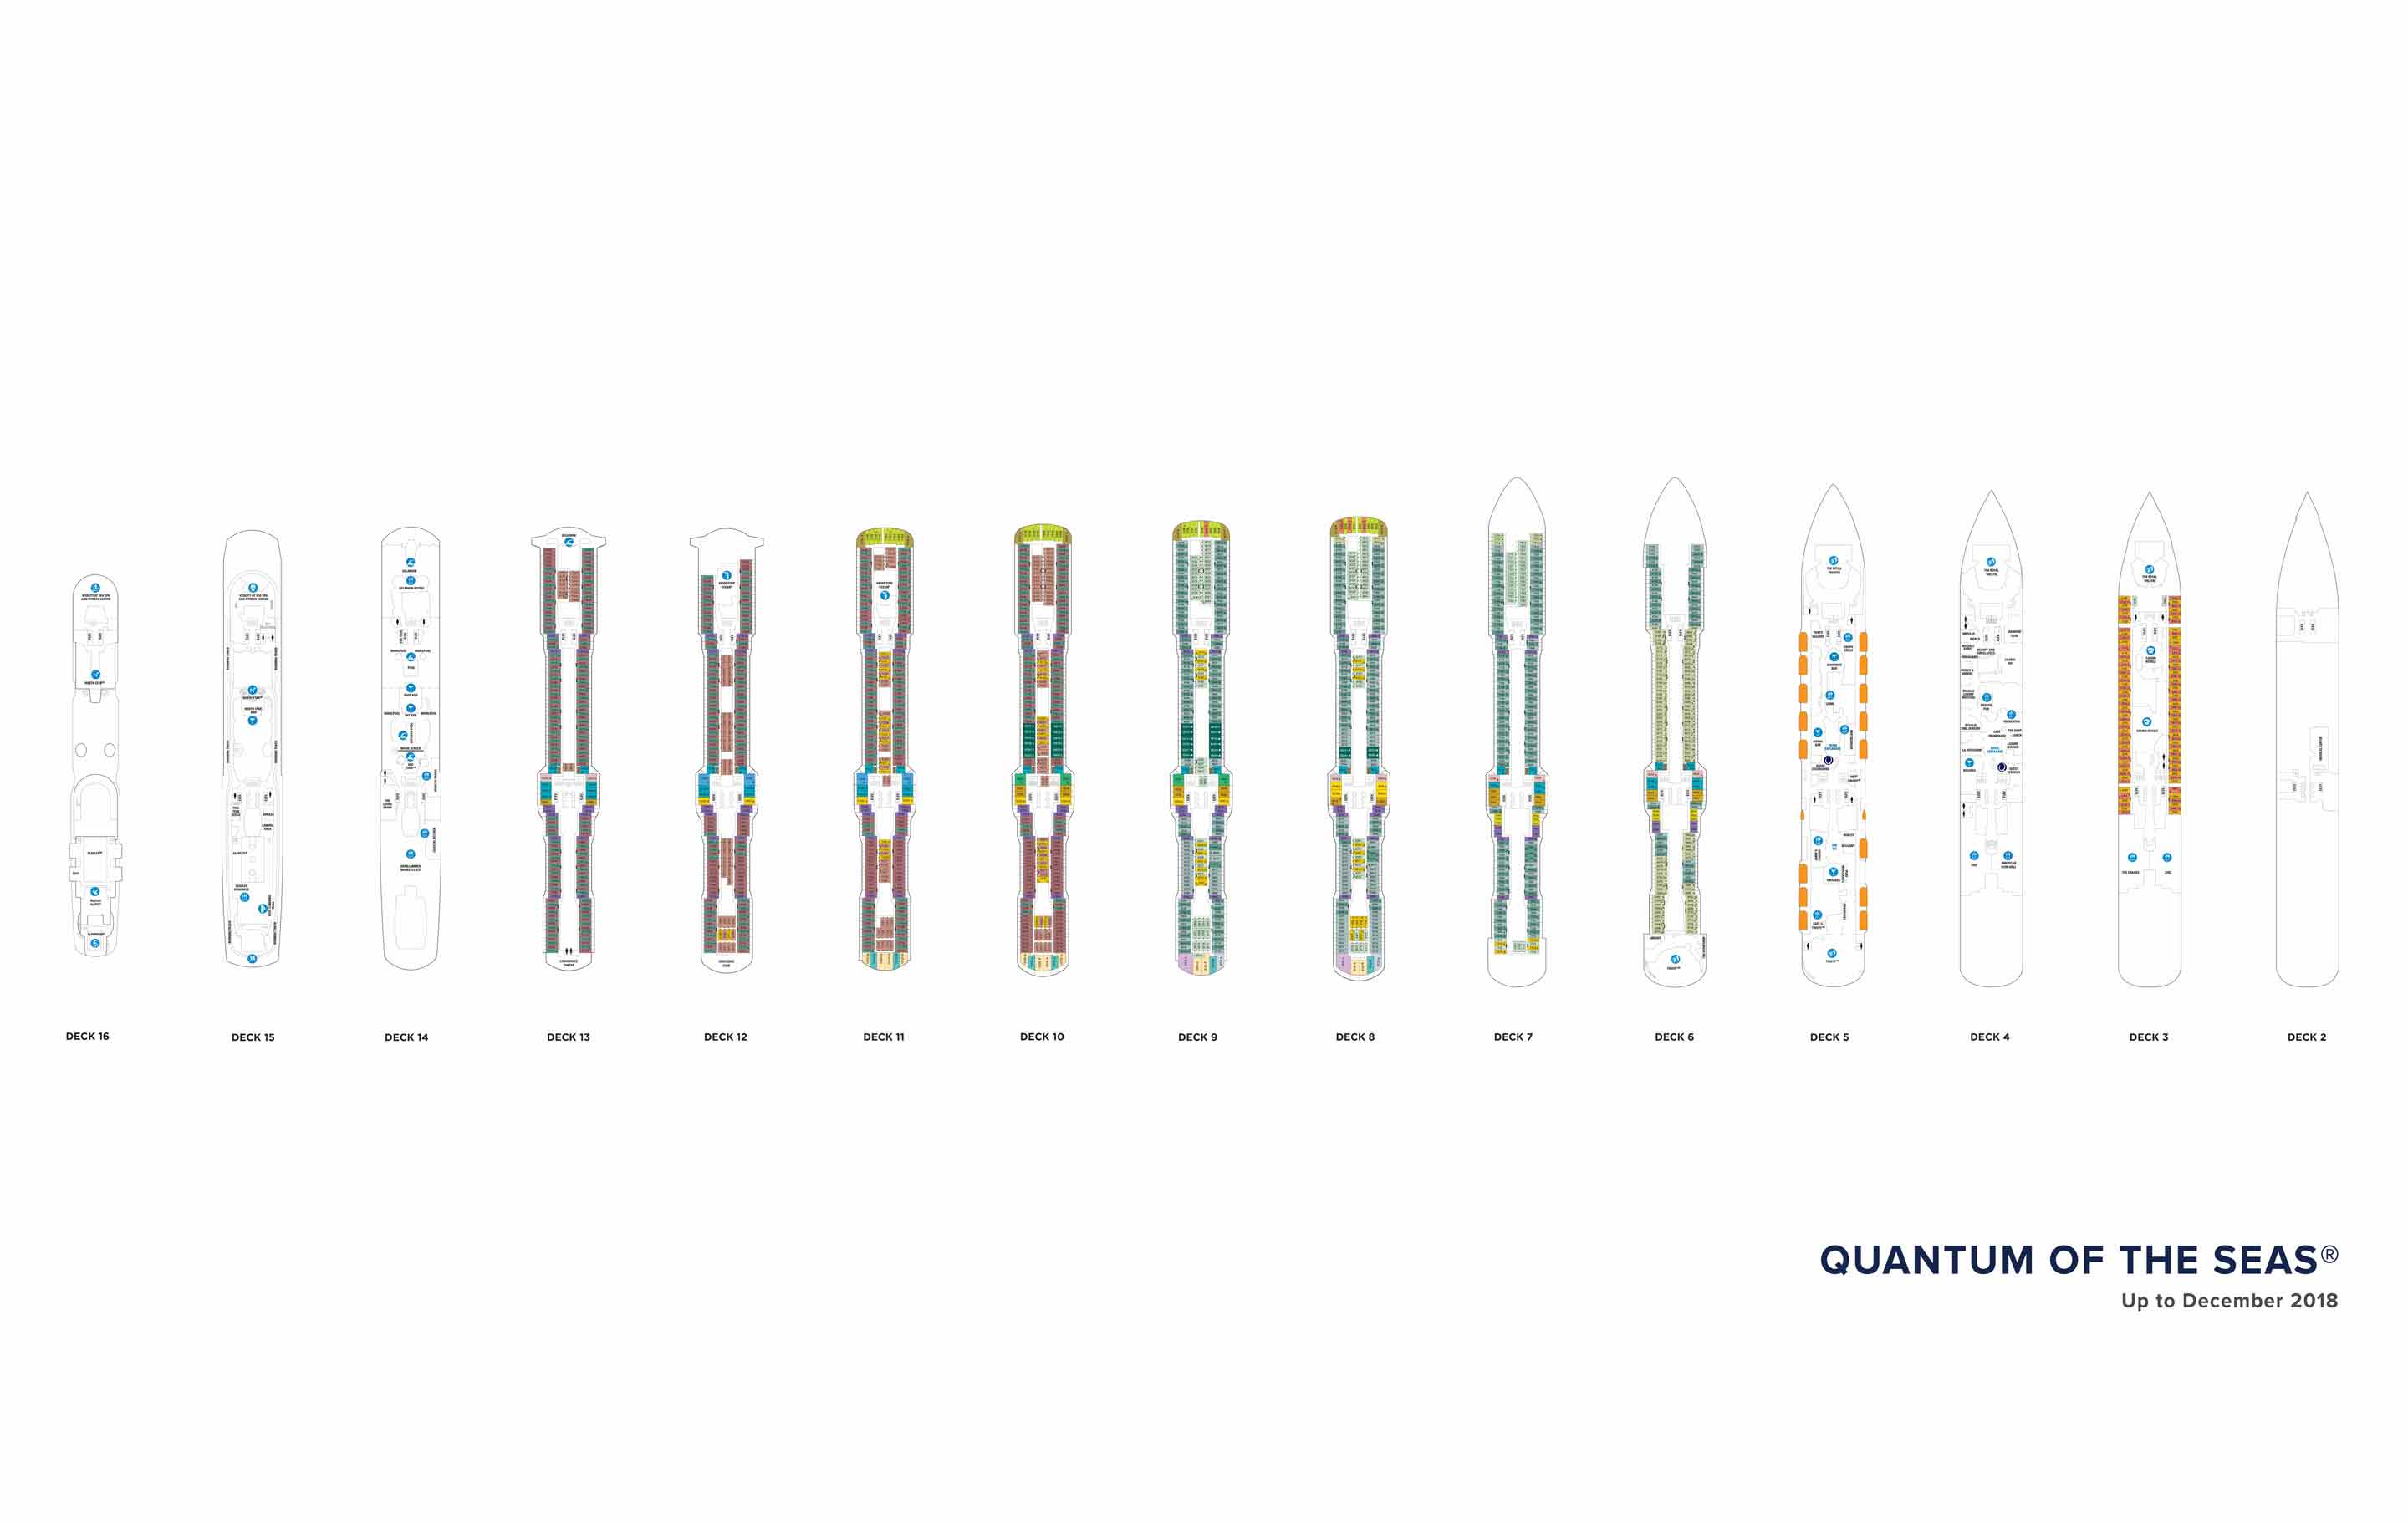 The deck plans for Quantum of the Seas, Royal Caribbean Cruises